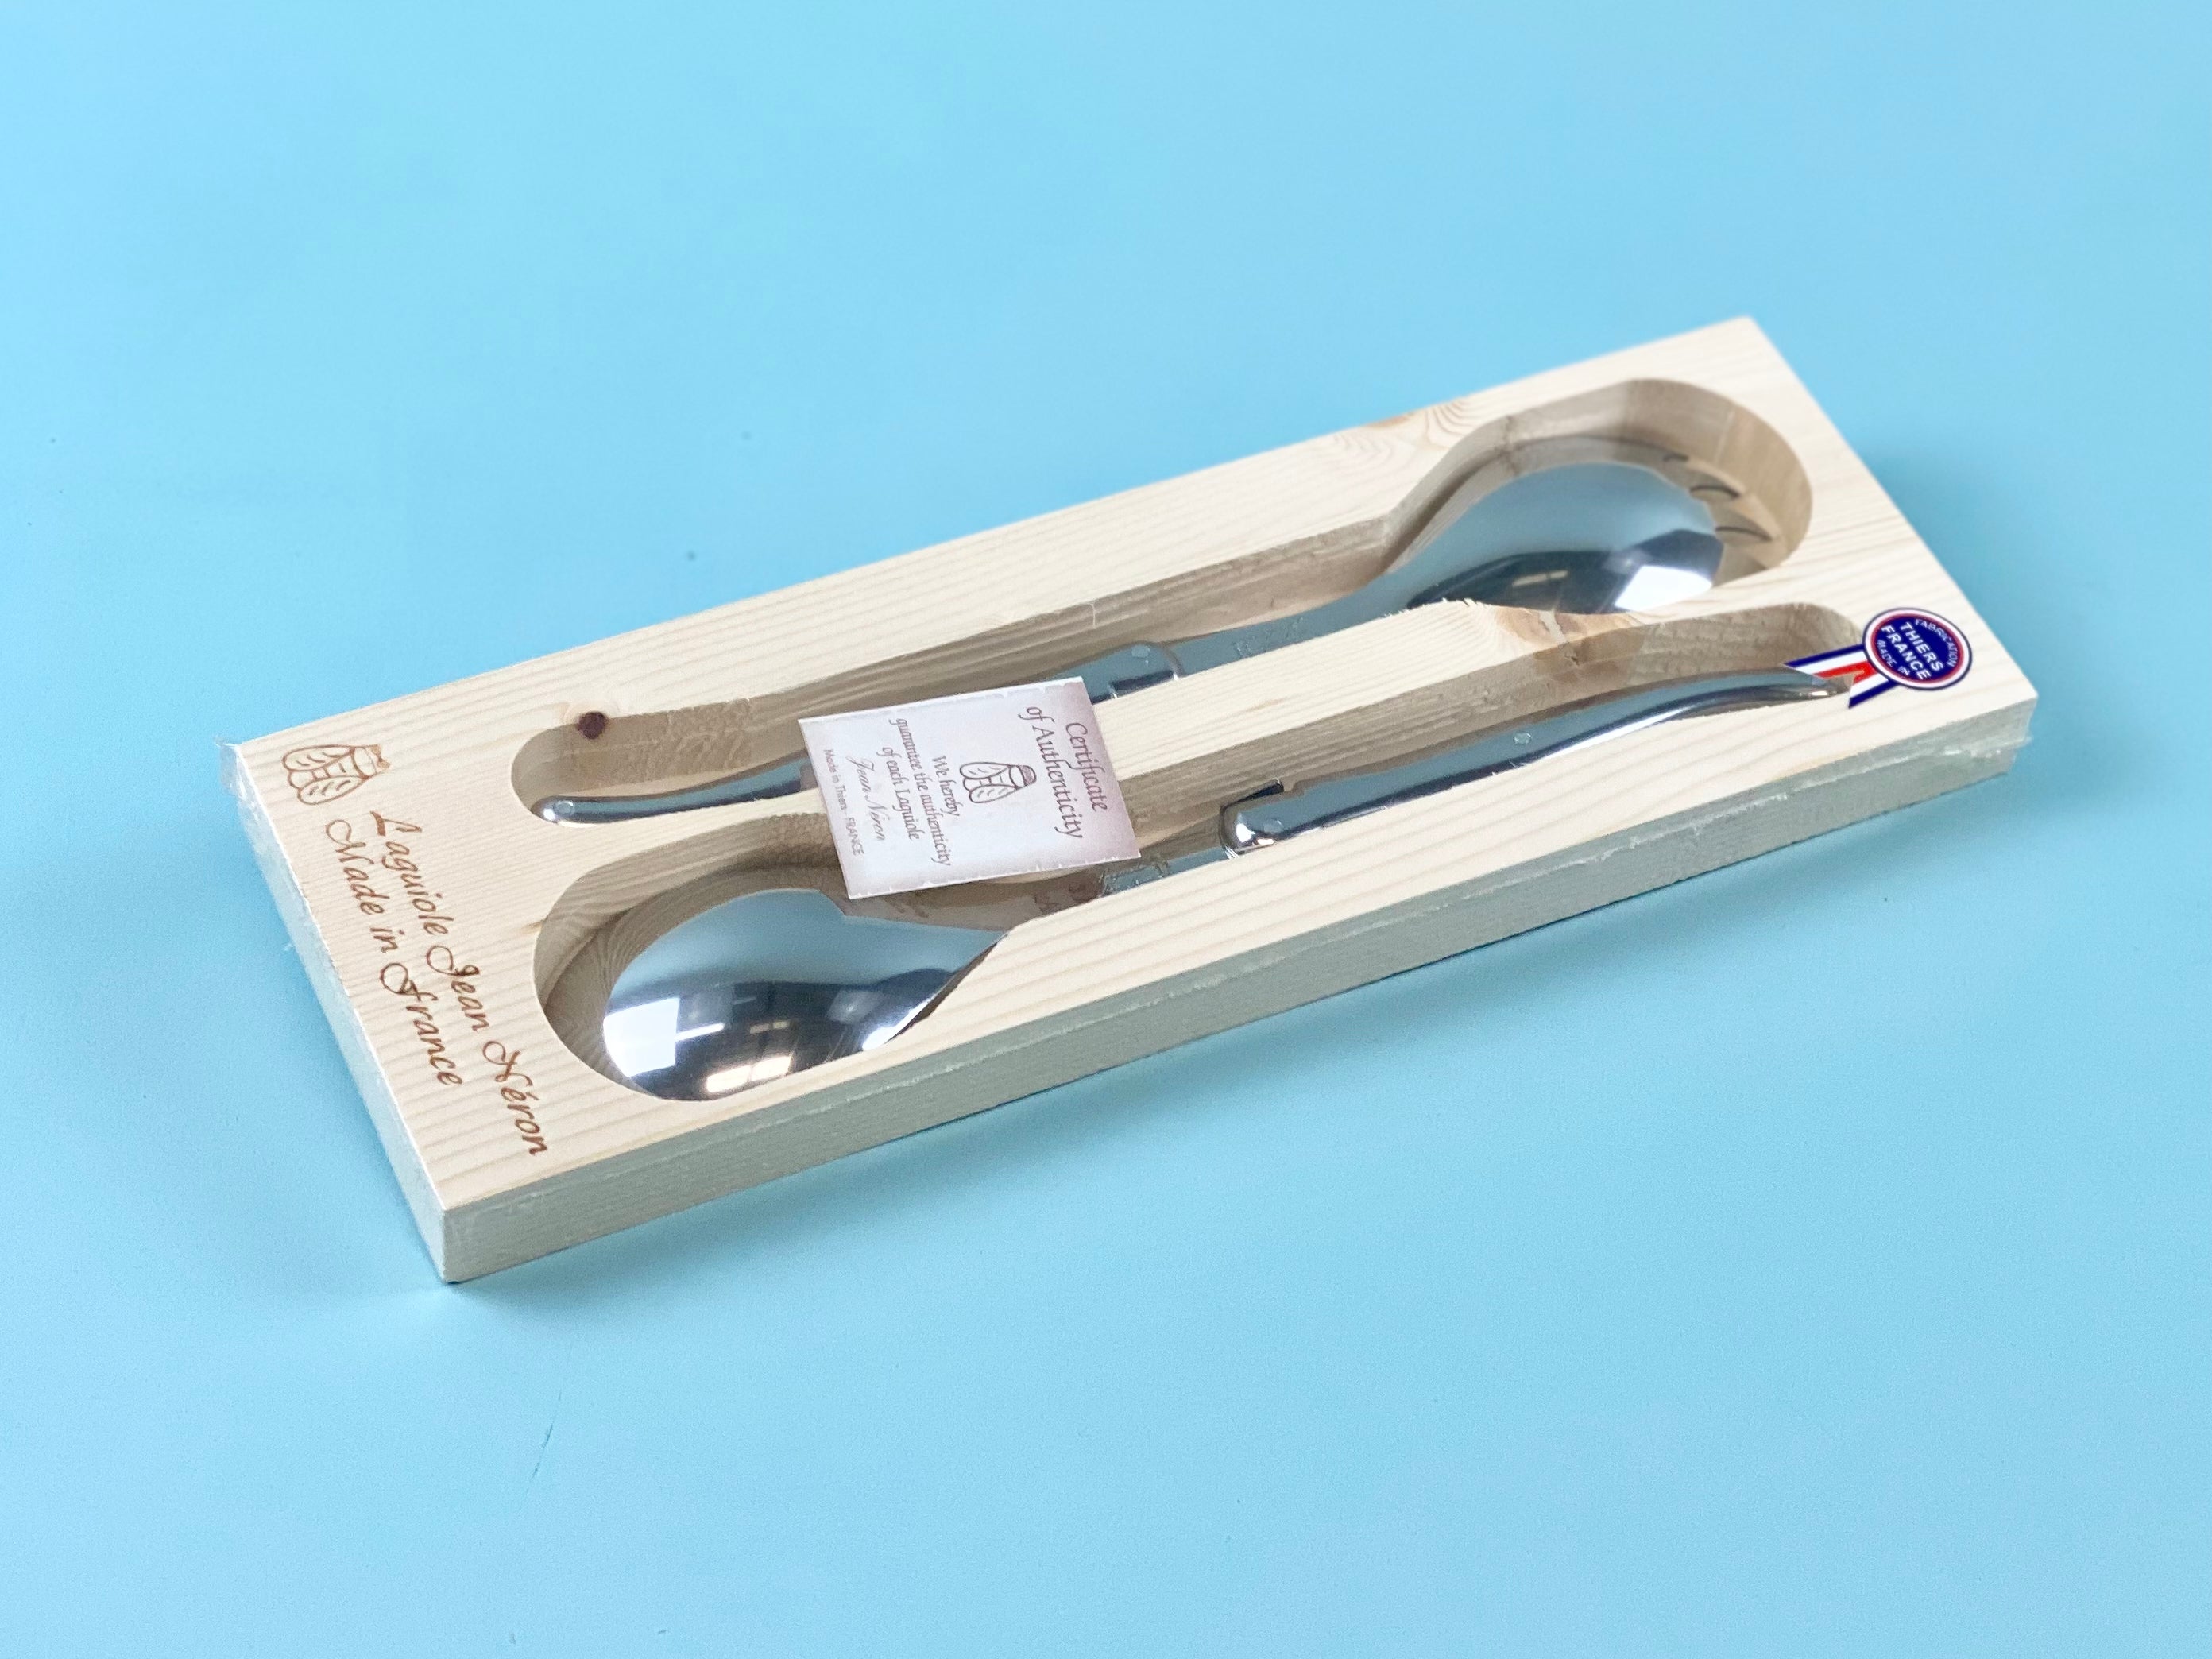 Laguiole Platine Salad Serving Set Stainless Steel in Wood Box (Set of 2) Cutlery Set Laguiole Brand_Laguiole Cheese Sets Kitchen_Dinnerware Laguiole Loose Mini Rainbow Utensils NR790123549PSS